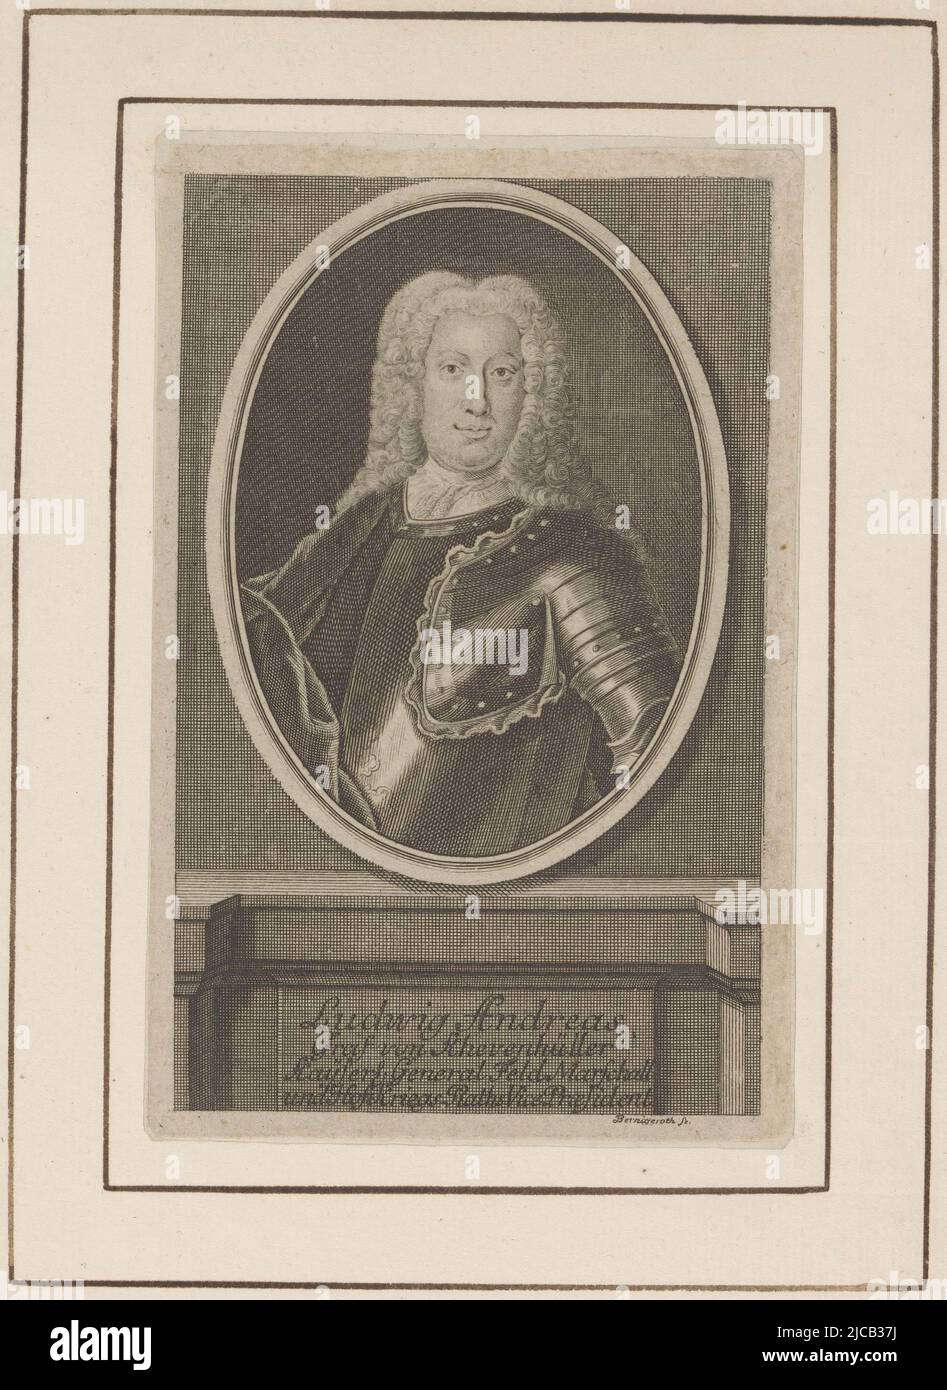 Portrait of Ludwig Andreas von Khevenh, print maker: Johann Martin Bernigeroth, (mentioned on object), Leipzig, 1723 - 1767, paper, engraving, h 143 mm - w 90 mm Stock Photo